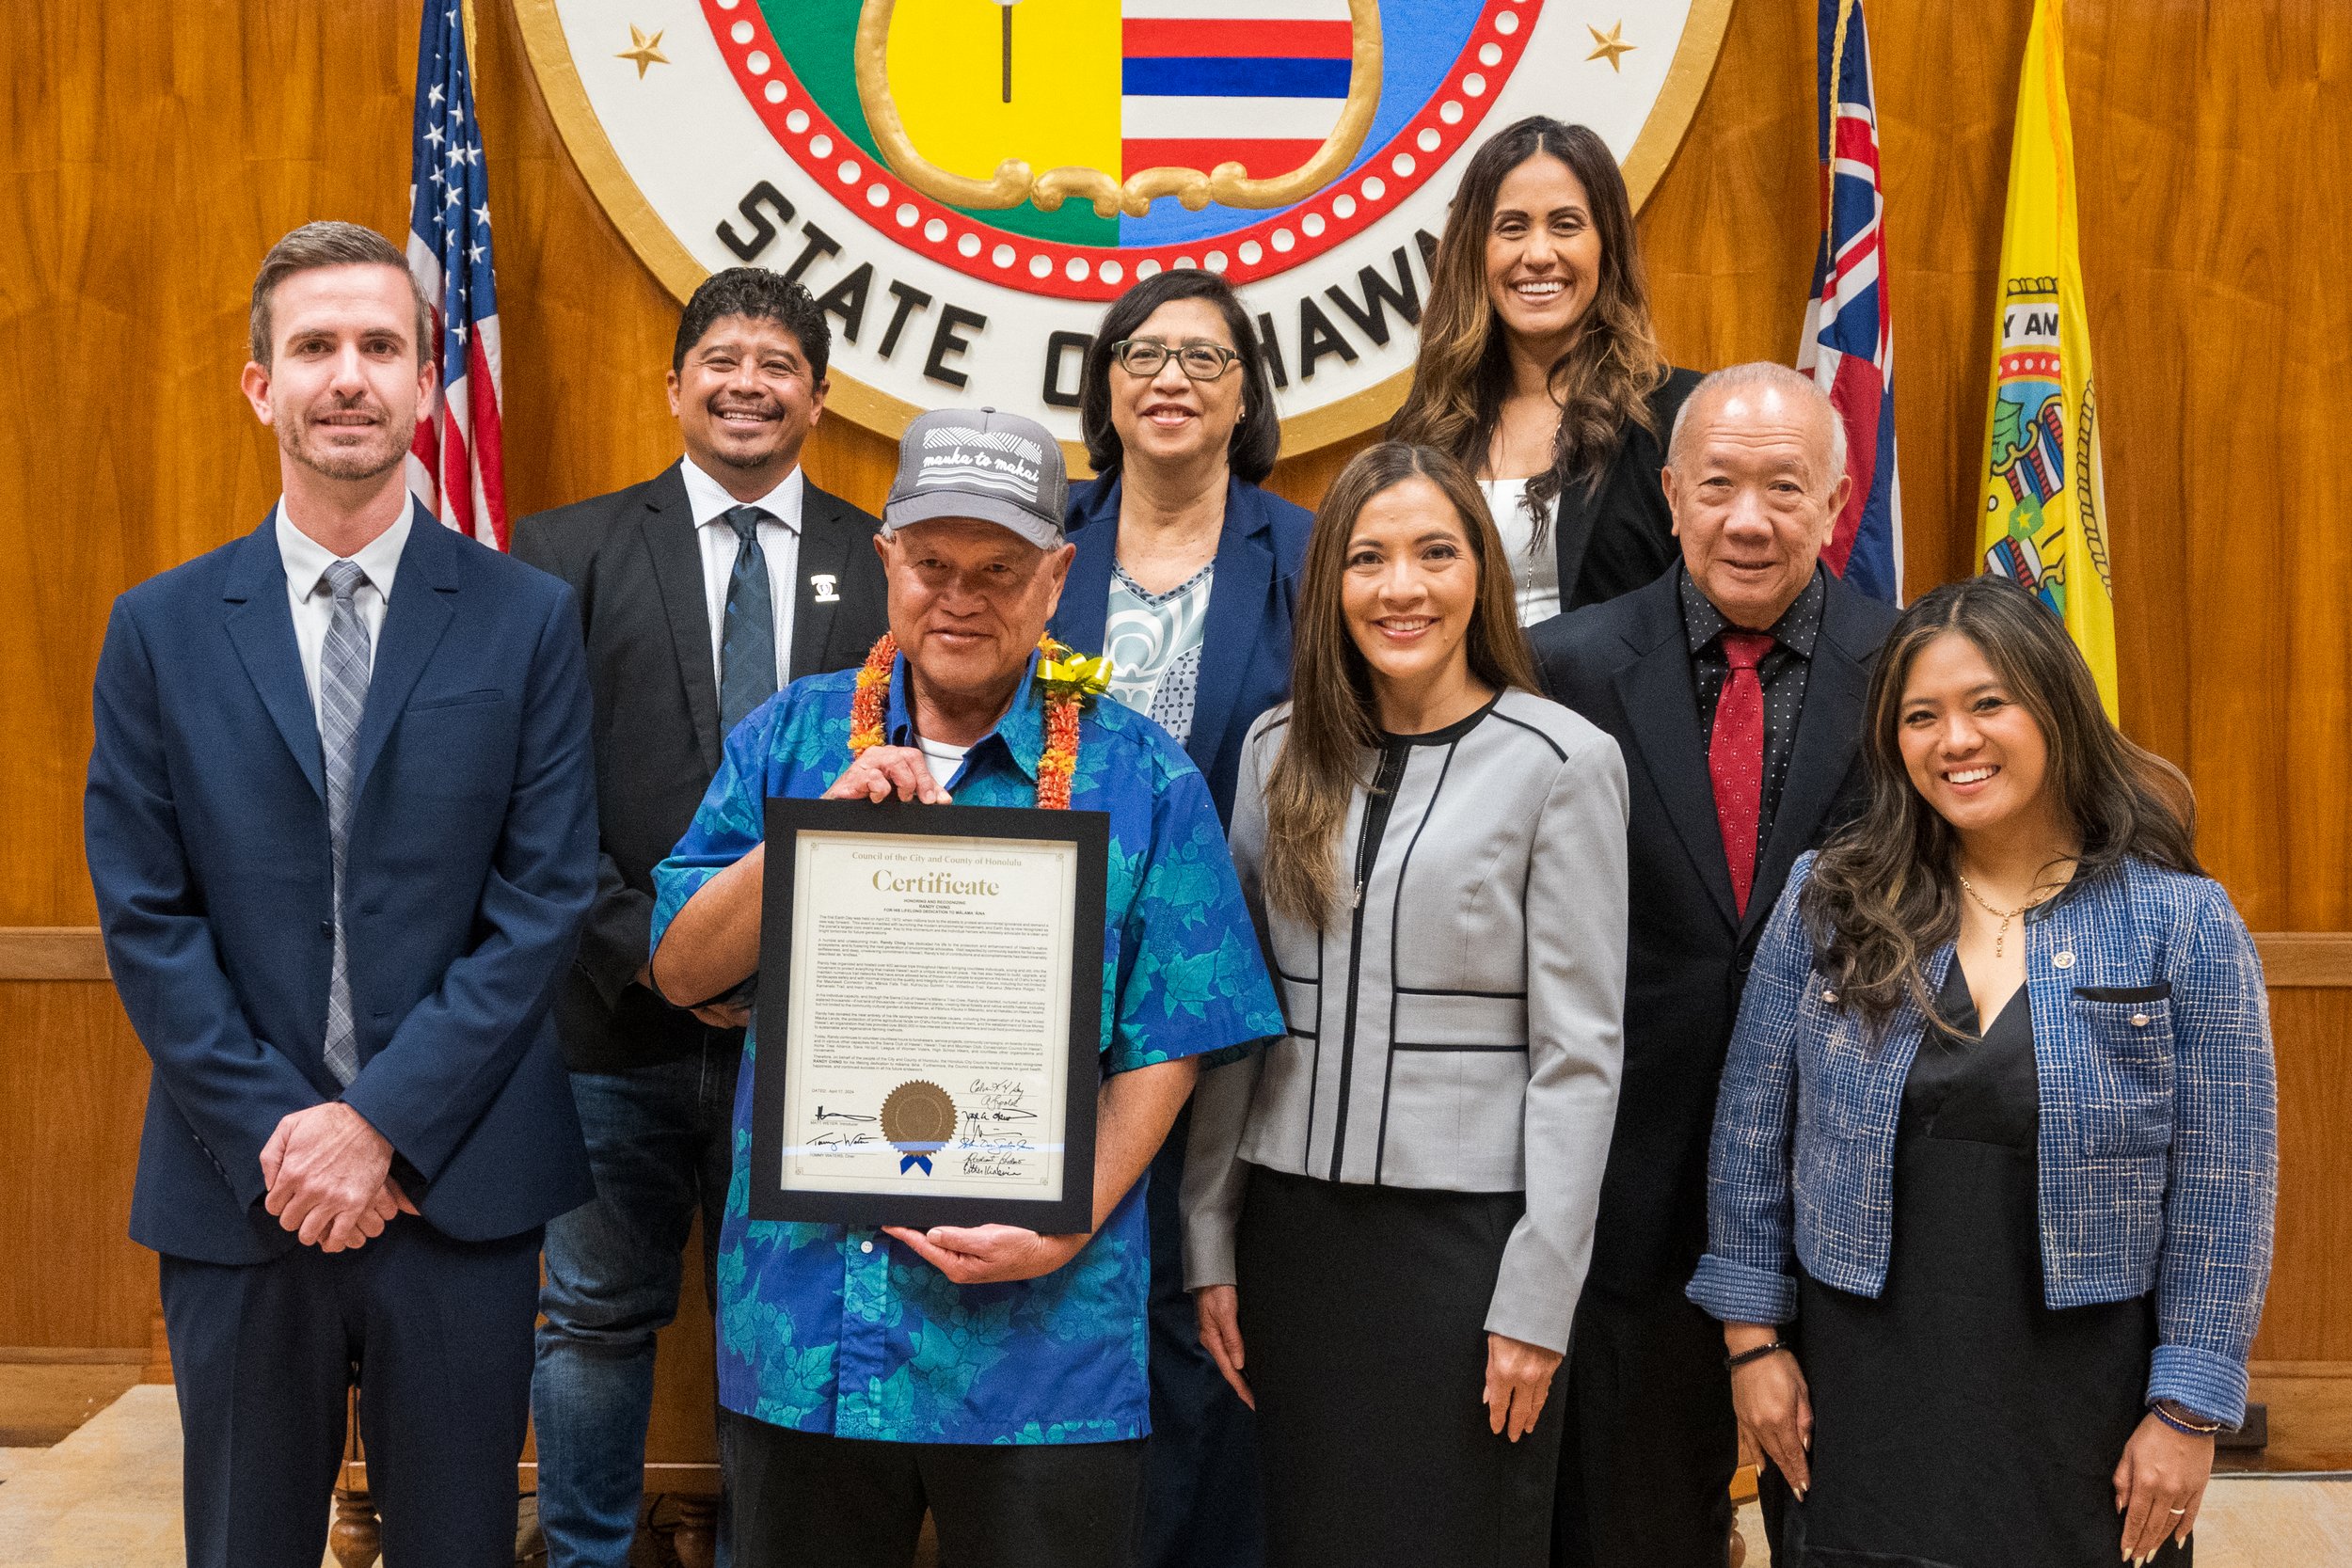 Randy and Honolulu City Council members at his recognition ceremony. Photo: Wayne Tanaka